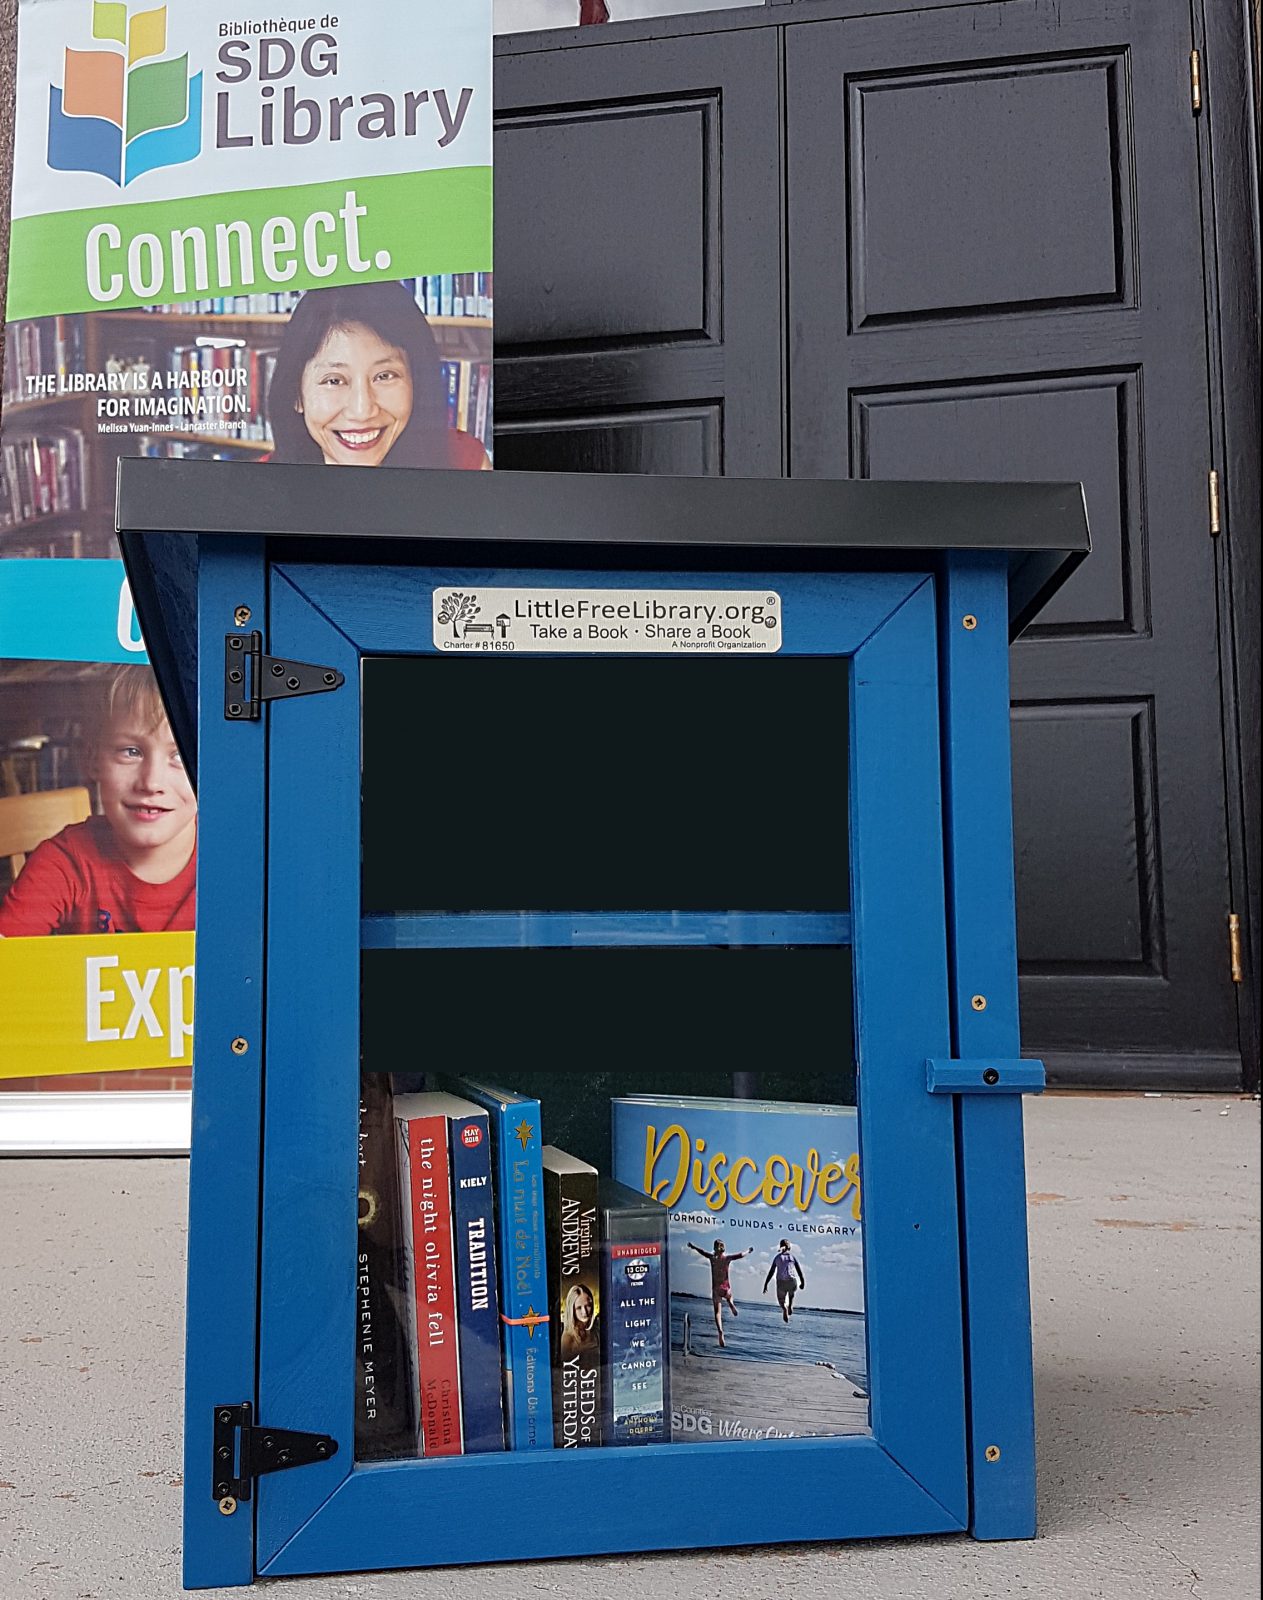 Newington Fire Hall to receive SDG’s first Little Free Library